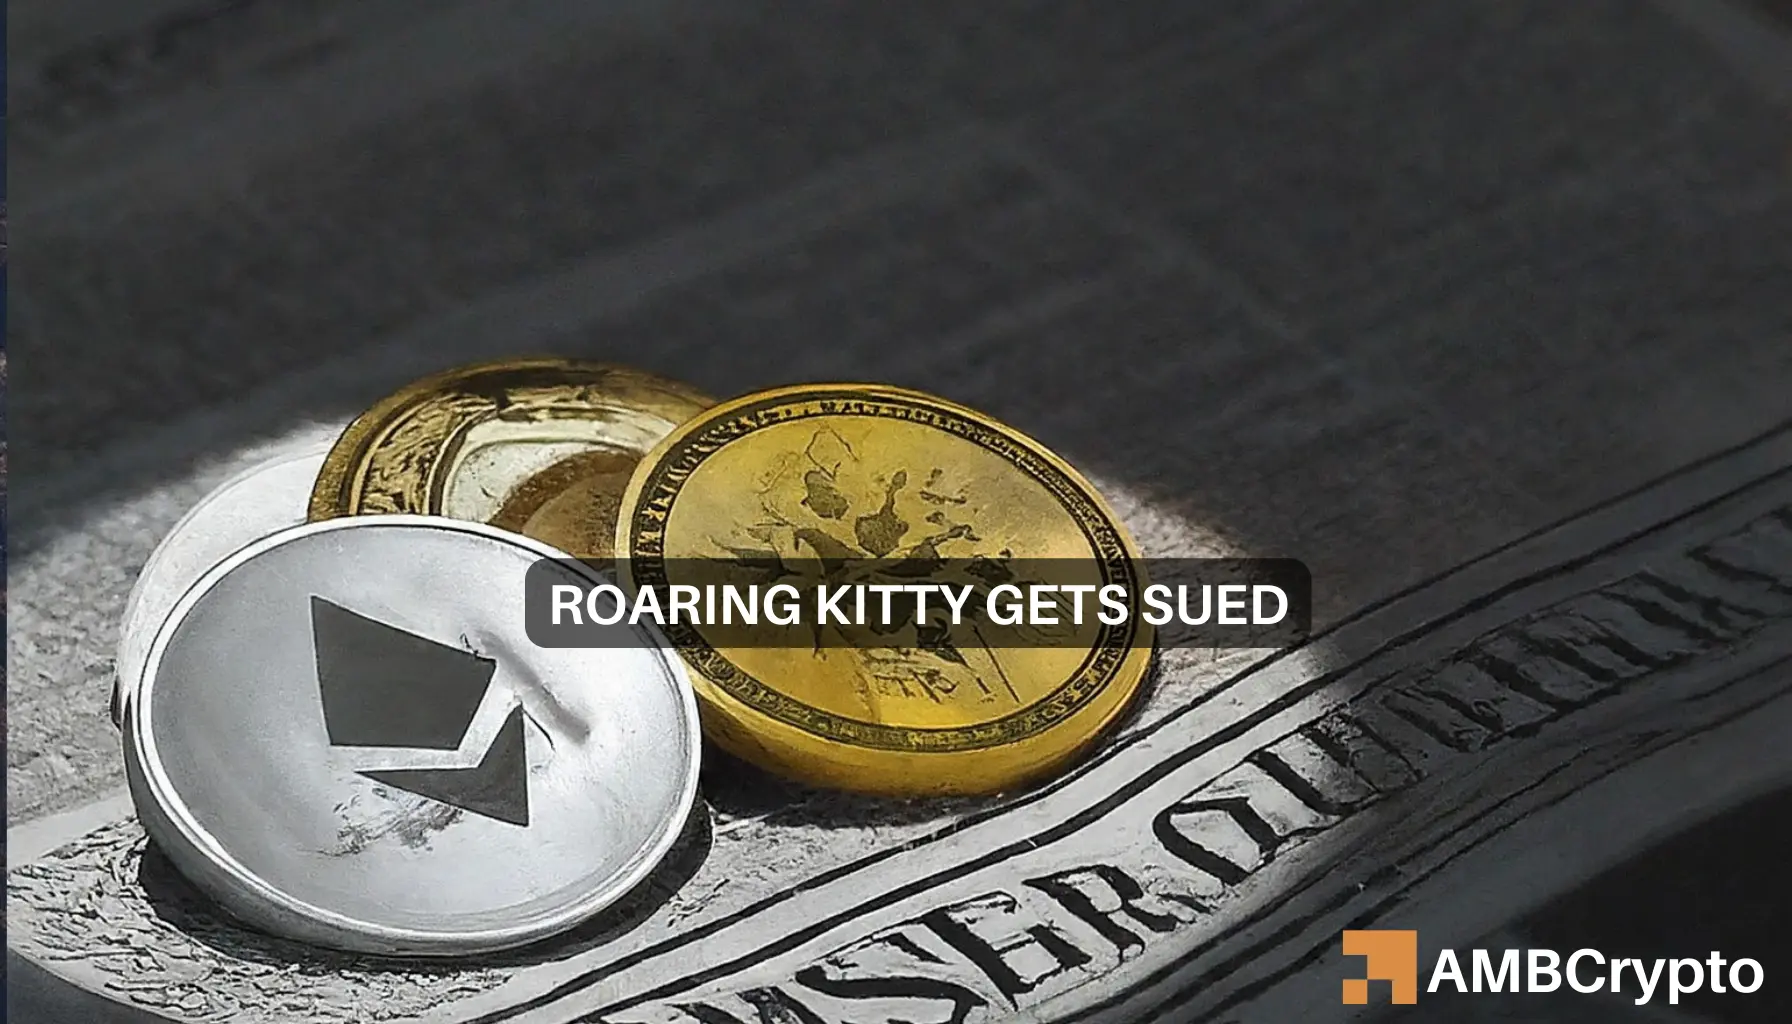 Roaring Kitty’s lawsuit casts shadow on THESE tokens – Here’s the full story